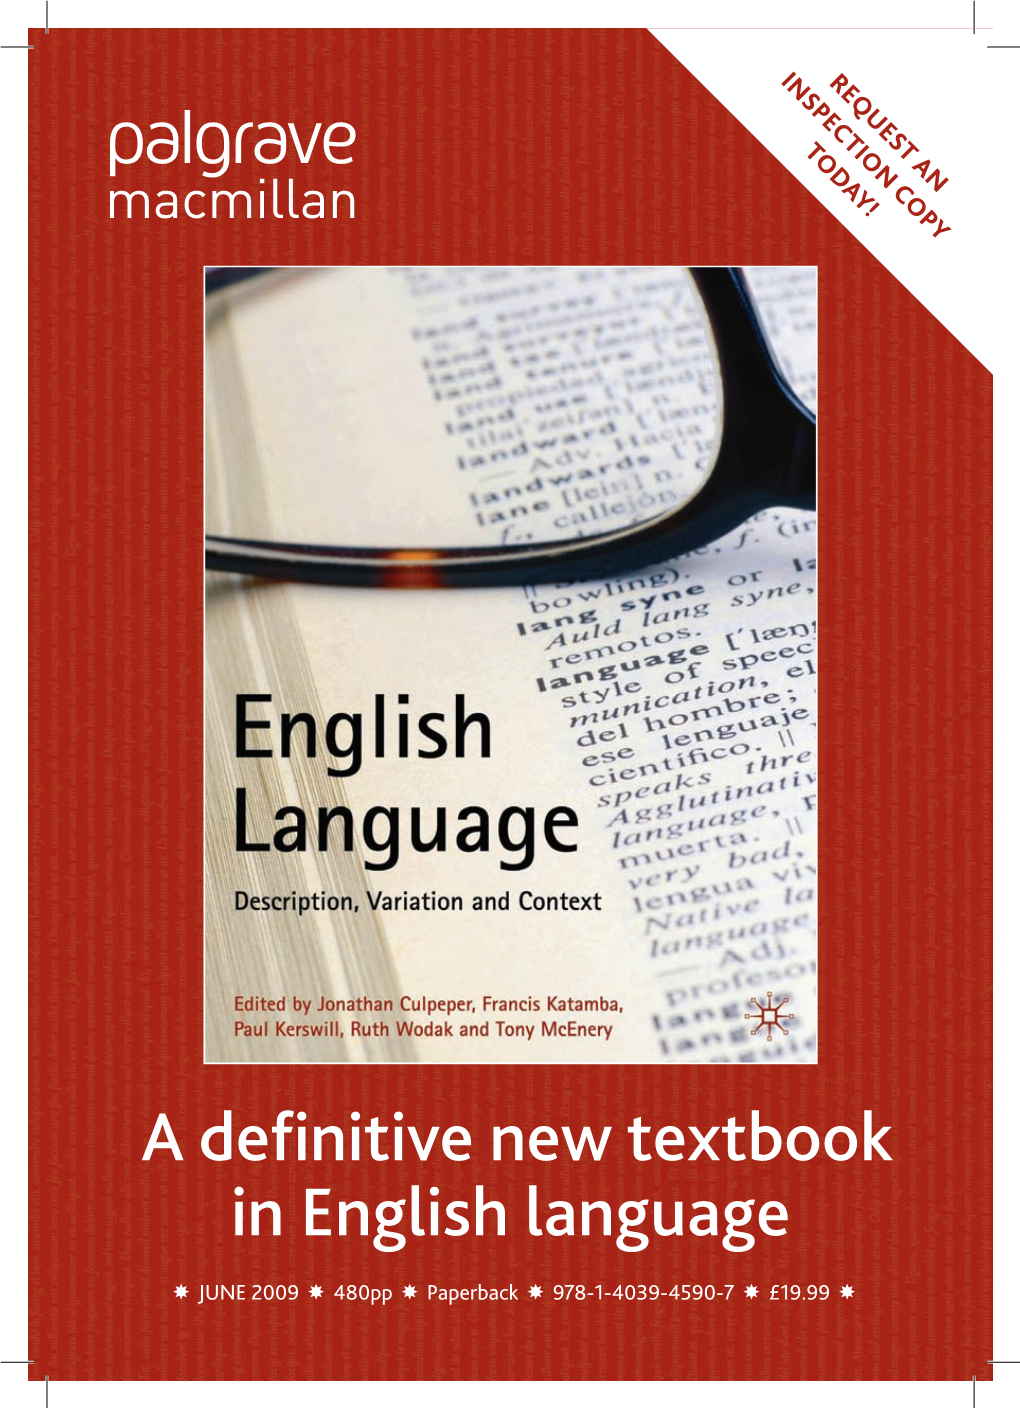 A Definitive New Textbook in English Language